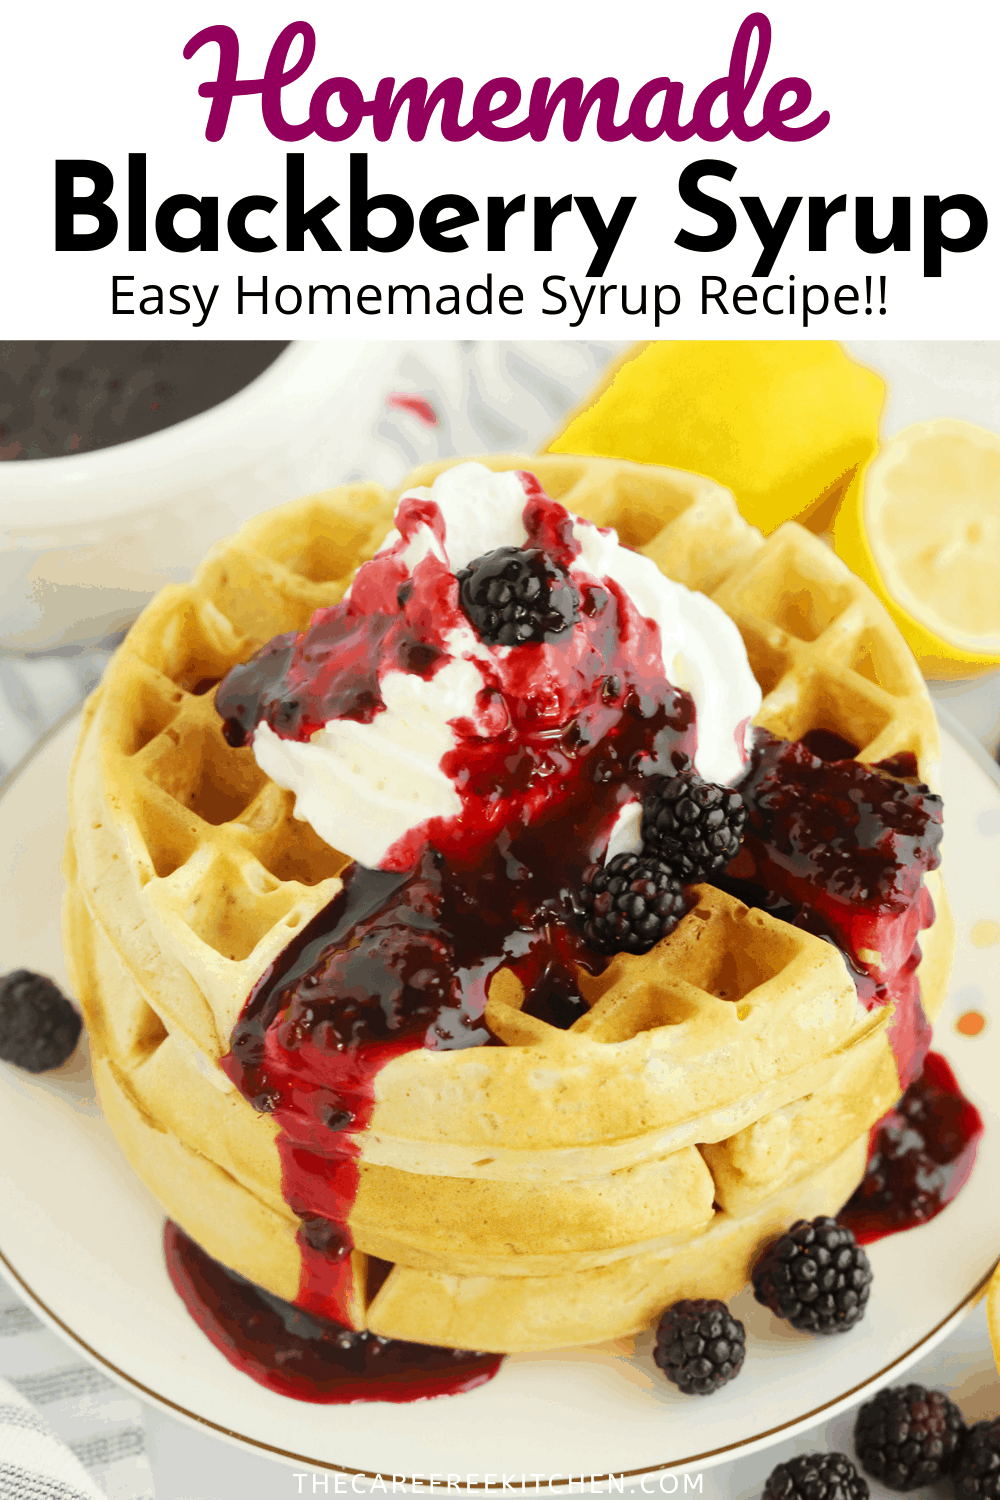 Homemade Easy Homemade Blackberry Syrup - The Carefree Kitchen